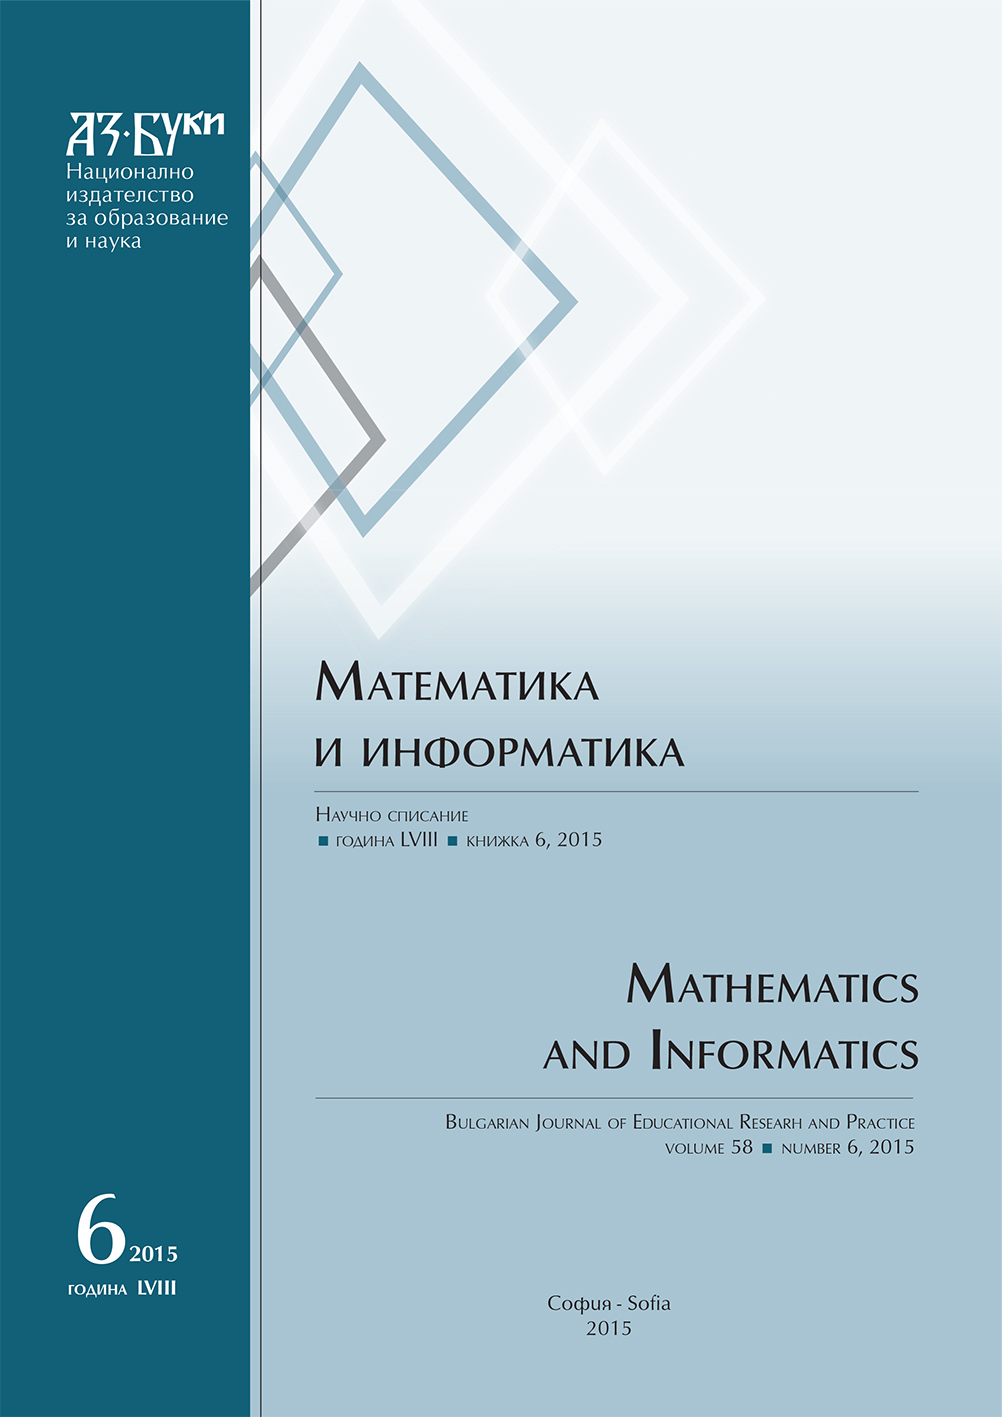 Errors Related to Topics in Geometry, Data Representation and Analysis Made
by Fifth Grade Students in the Republic of Мacedonia Cover Image